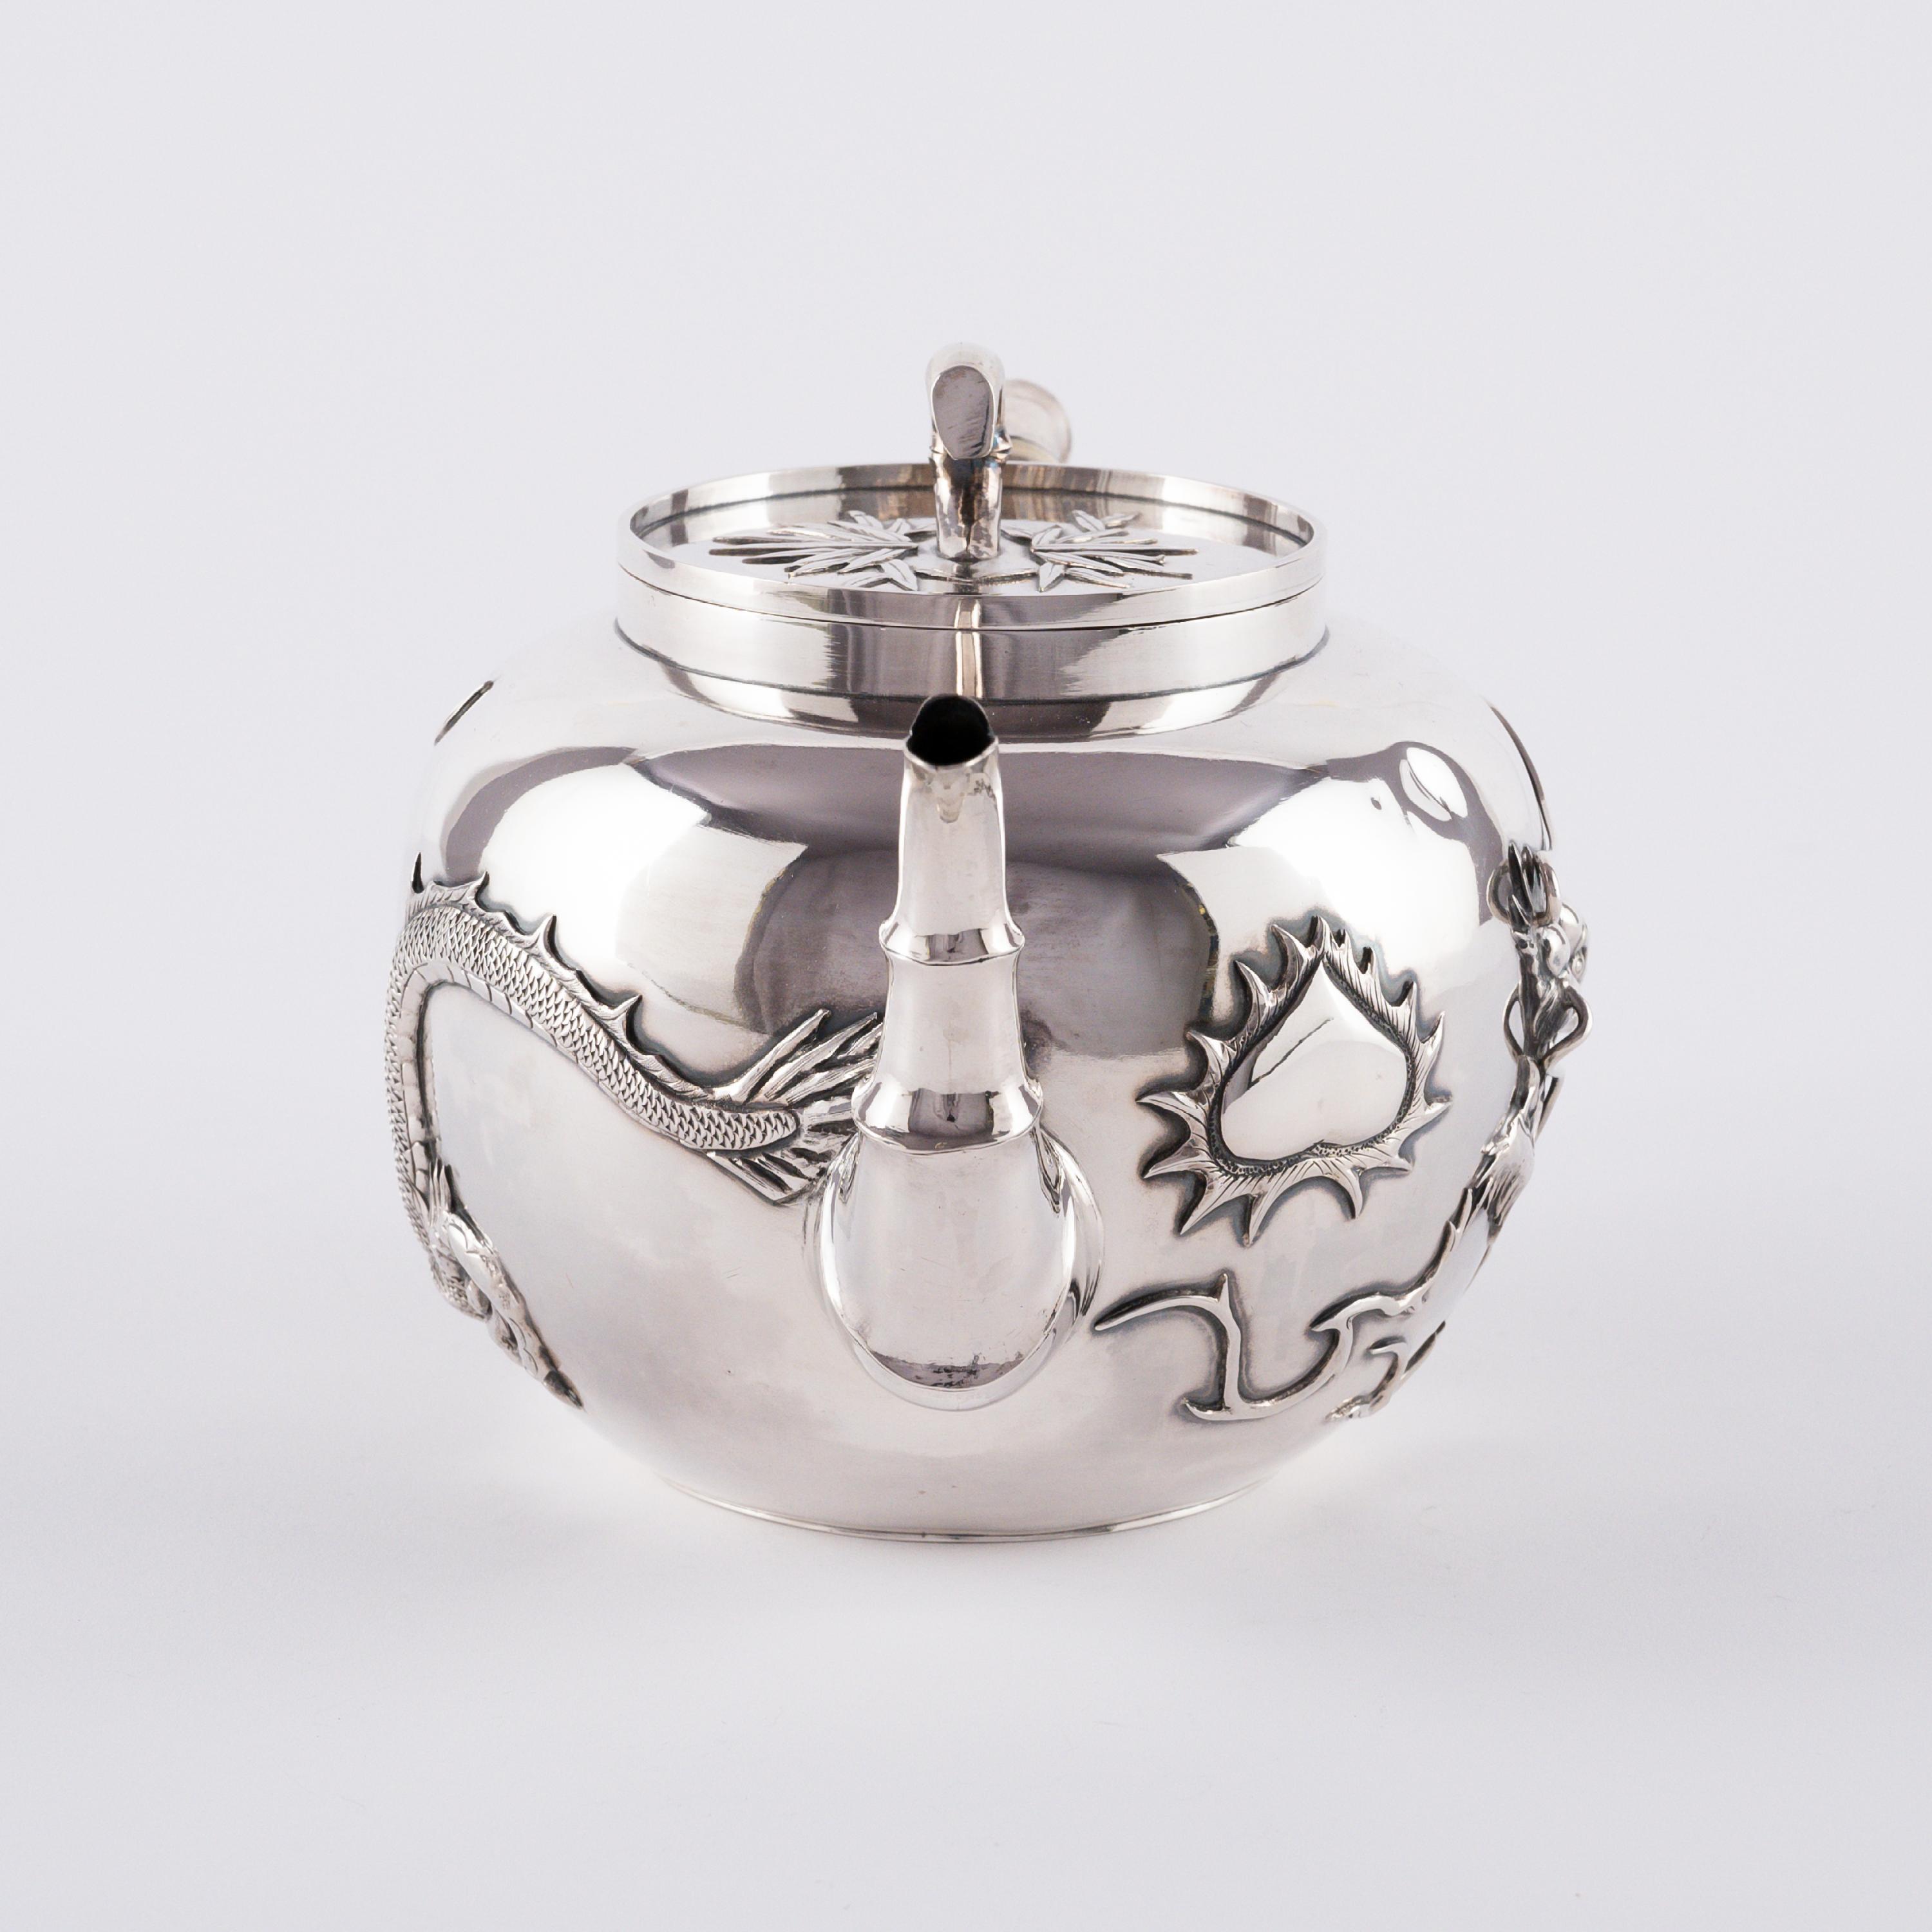 EXCEPTIONAL SILVER TEA SERVICE WITH DRAGON DECORATION - Image 5 of 12